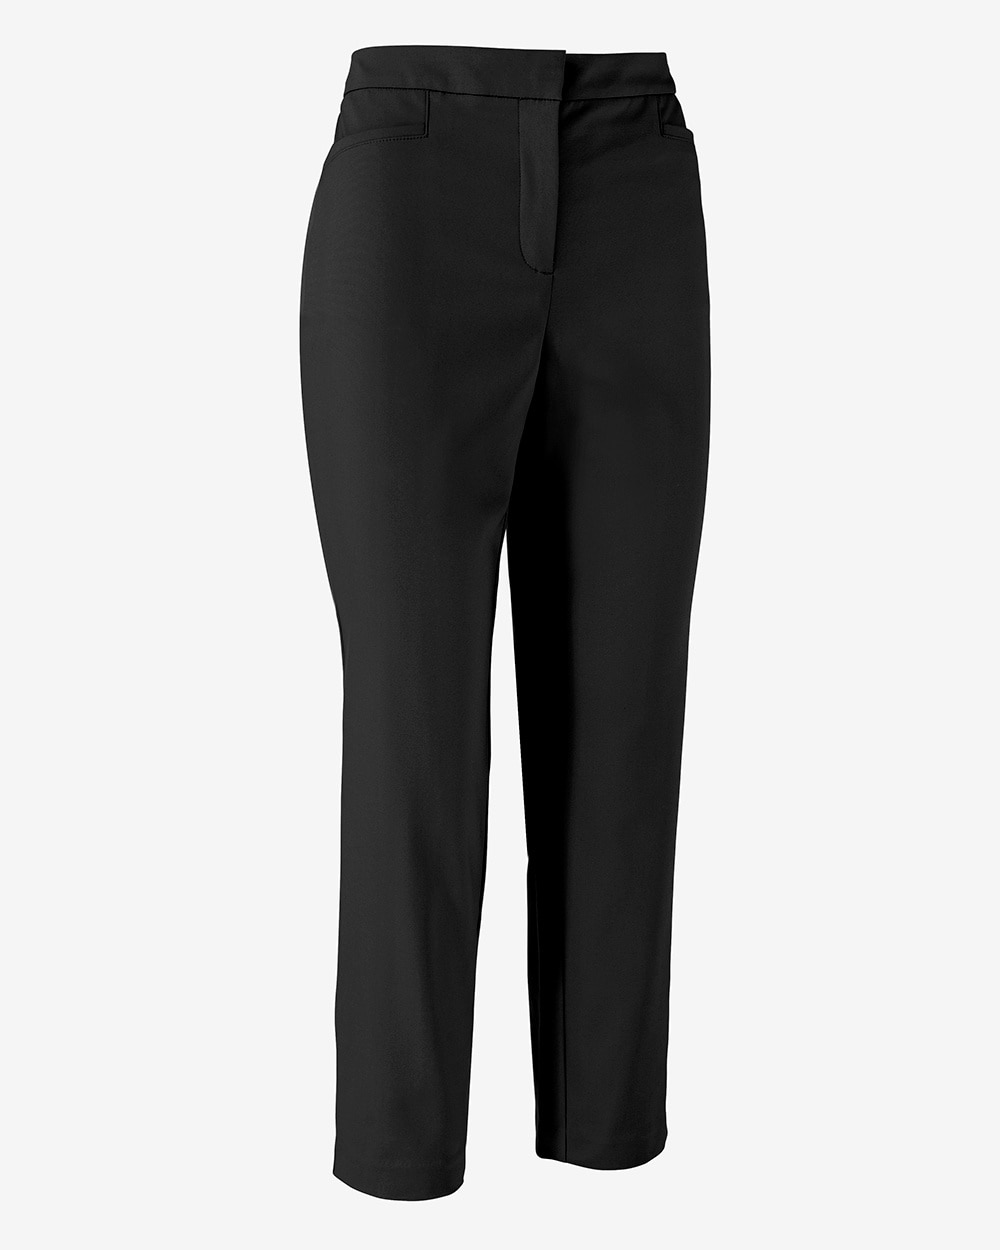 Fabulously Slimming Straight Trouser Ankle Pants